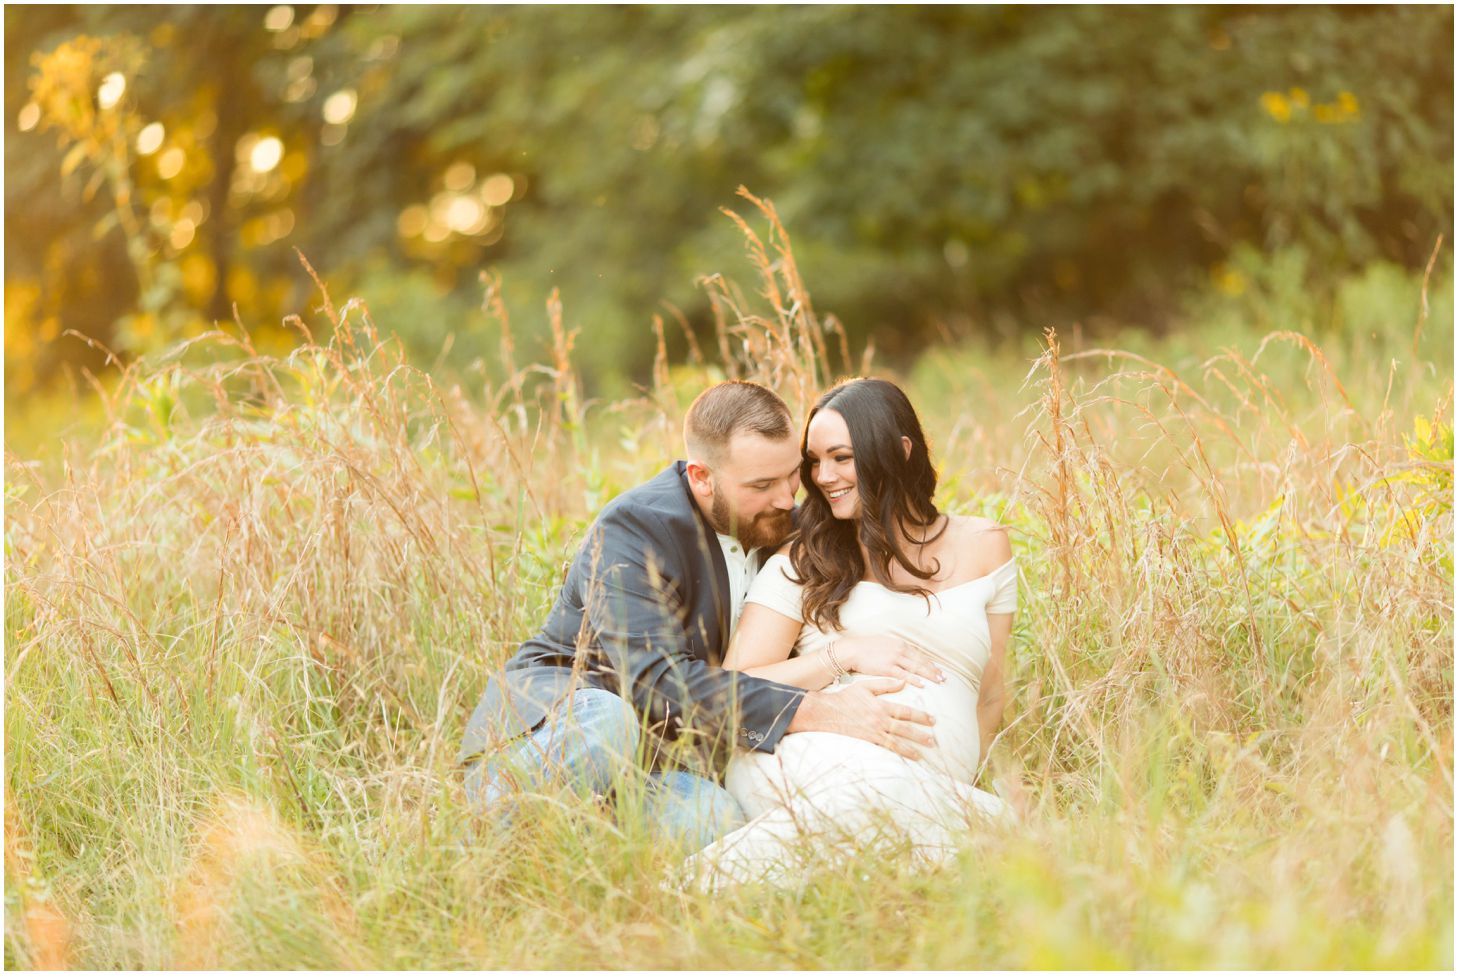 Couple in grassy field at sunset for maternity pictures at North Park in Pittsburgh